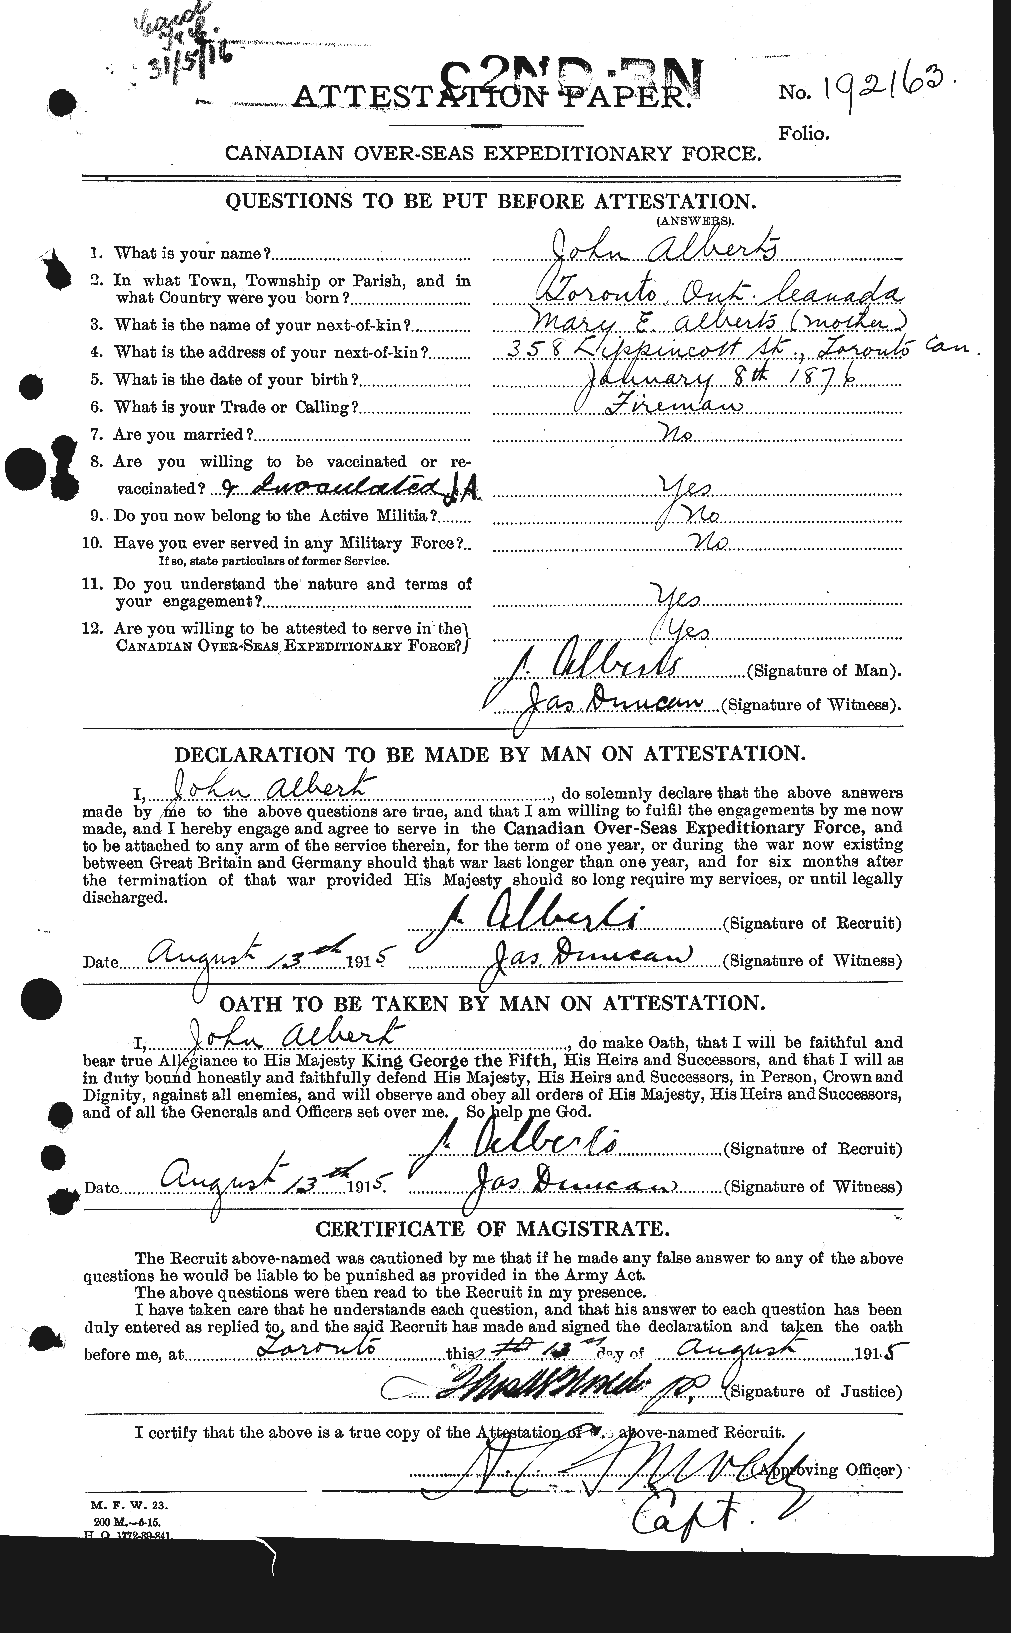 Personnel Records of the First World War - CEF 204644a